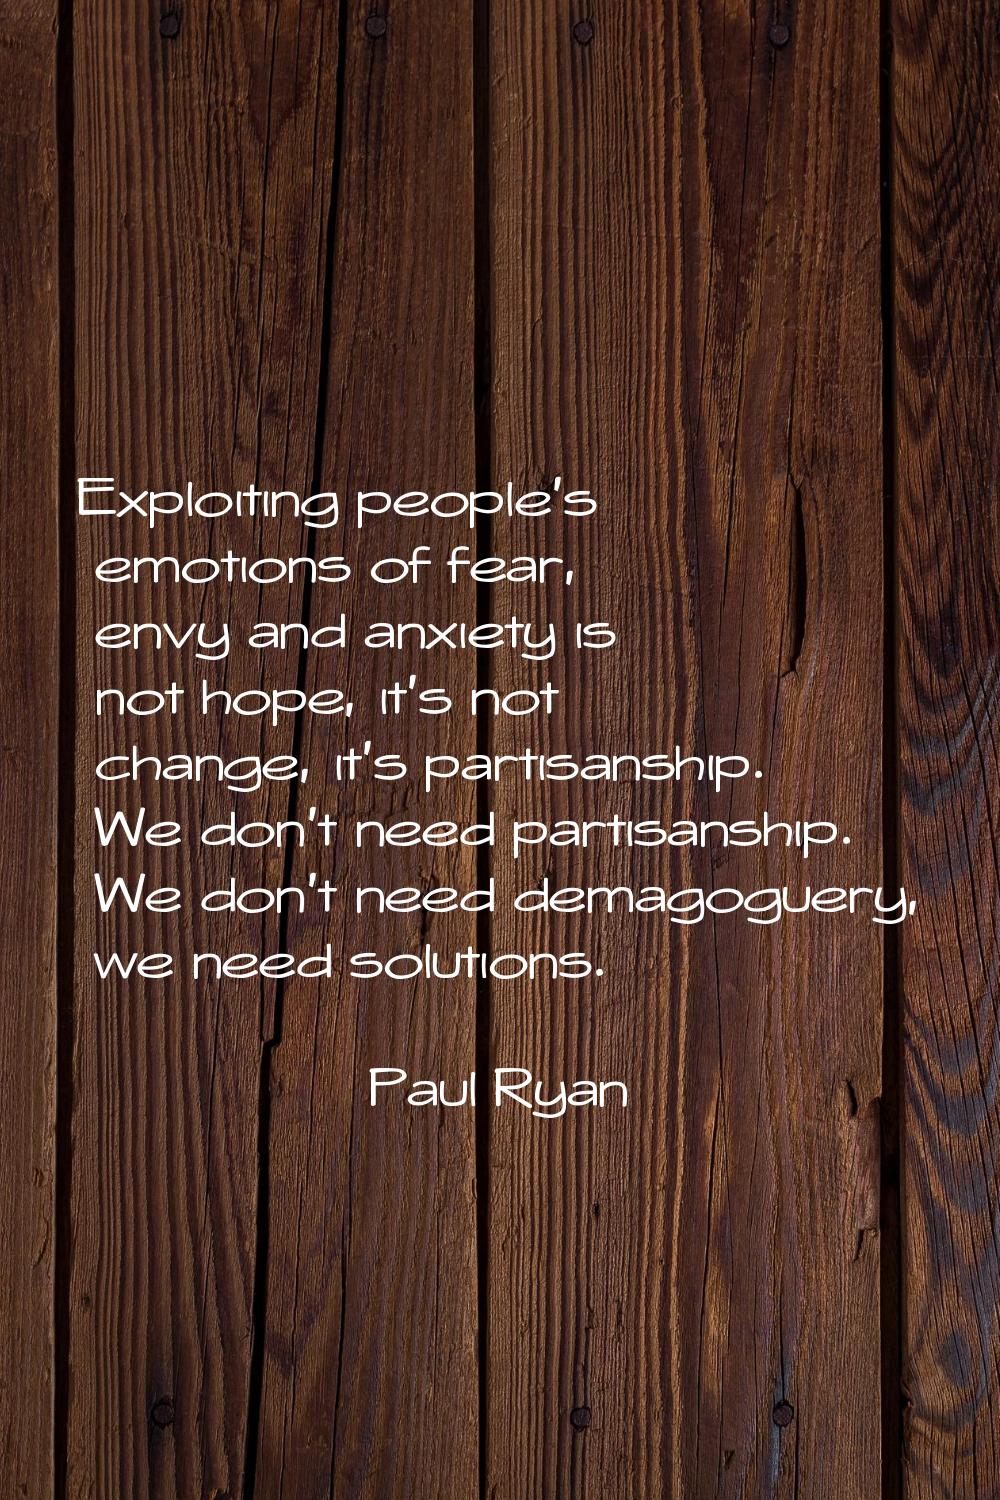 Exploiting people's emotions of fear, envy and anxiety is not hope, it's not change, it's partisans